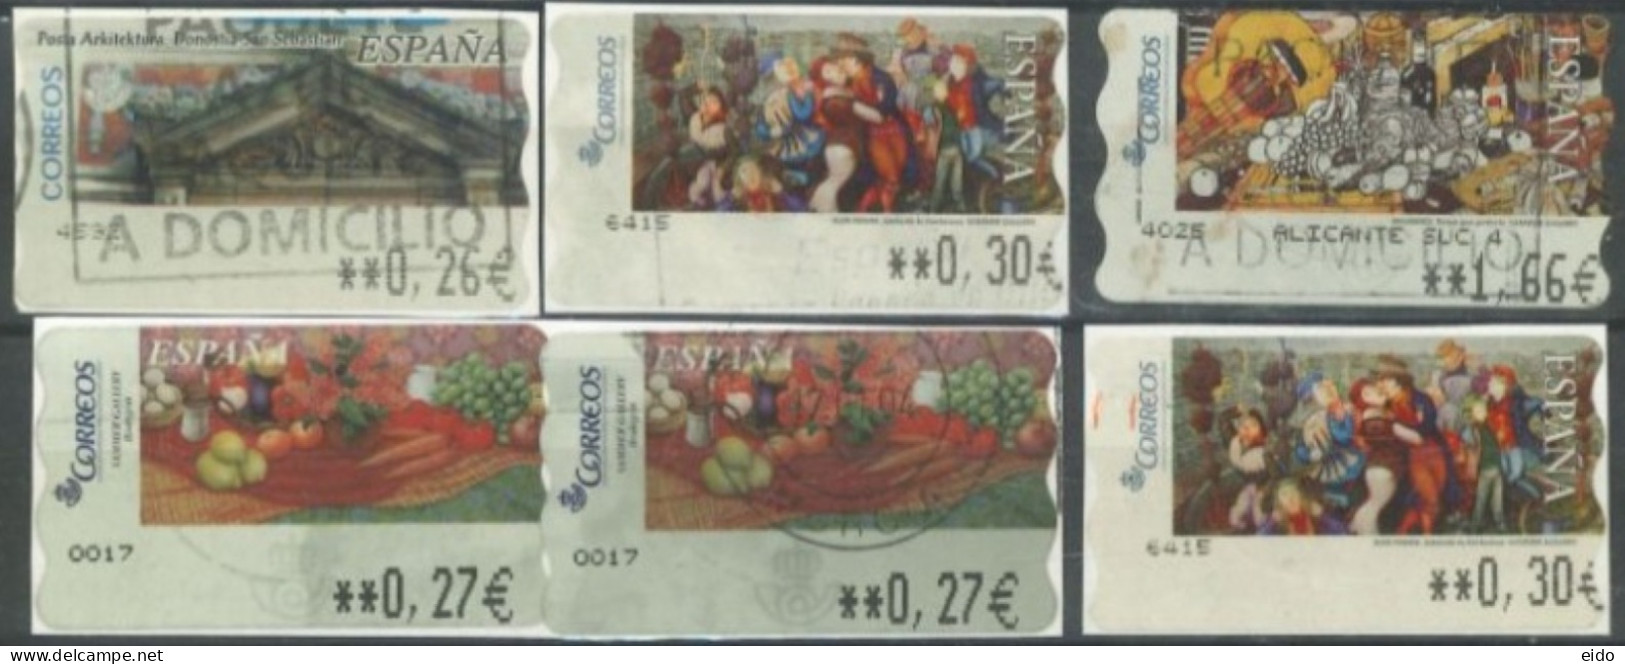 SPAIN- 2003/04,SAN SABASTIAN ARCH. AND SAMMER GALLERY STAMPS LABELS SET OF 6, DIFFERENT VALUES, USED. - Gebruikt